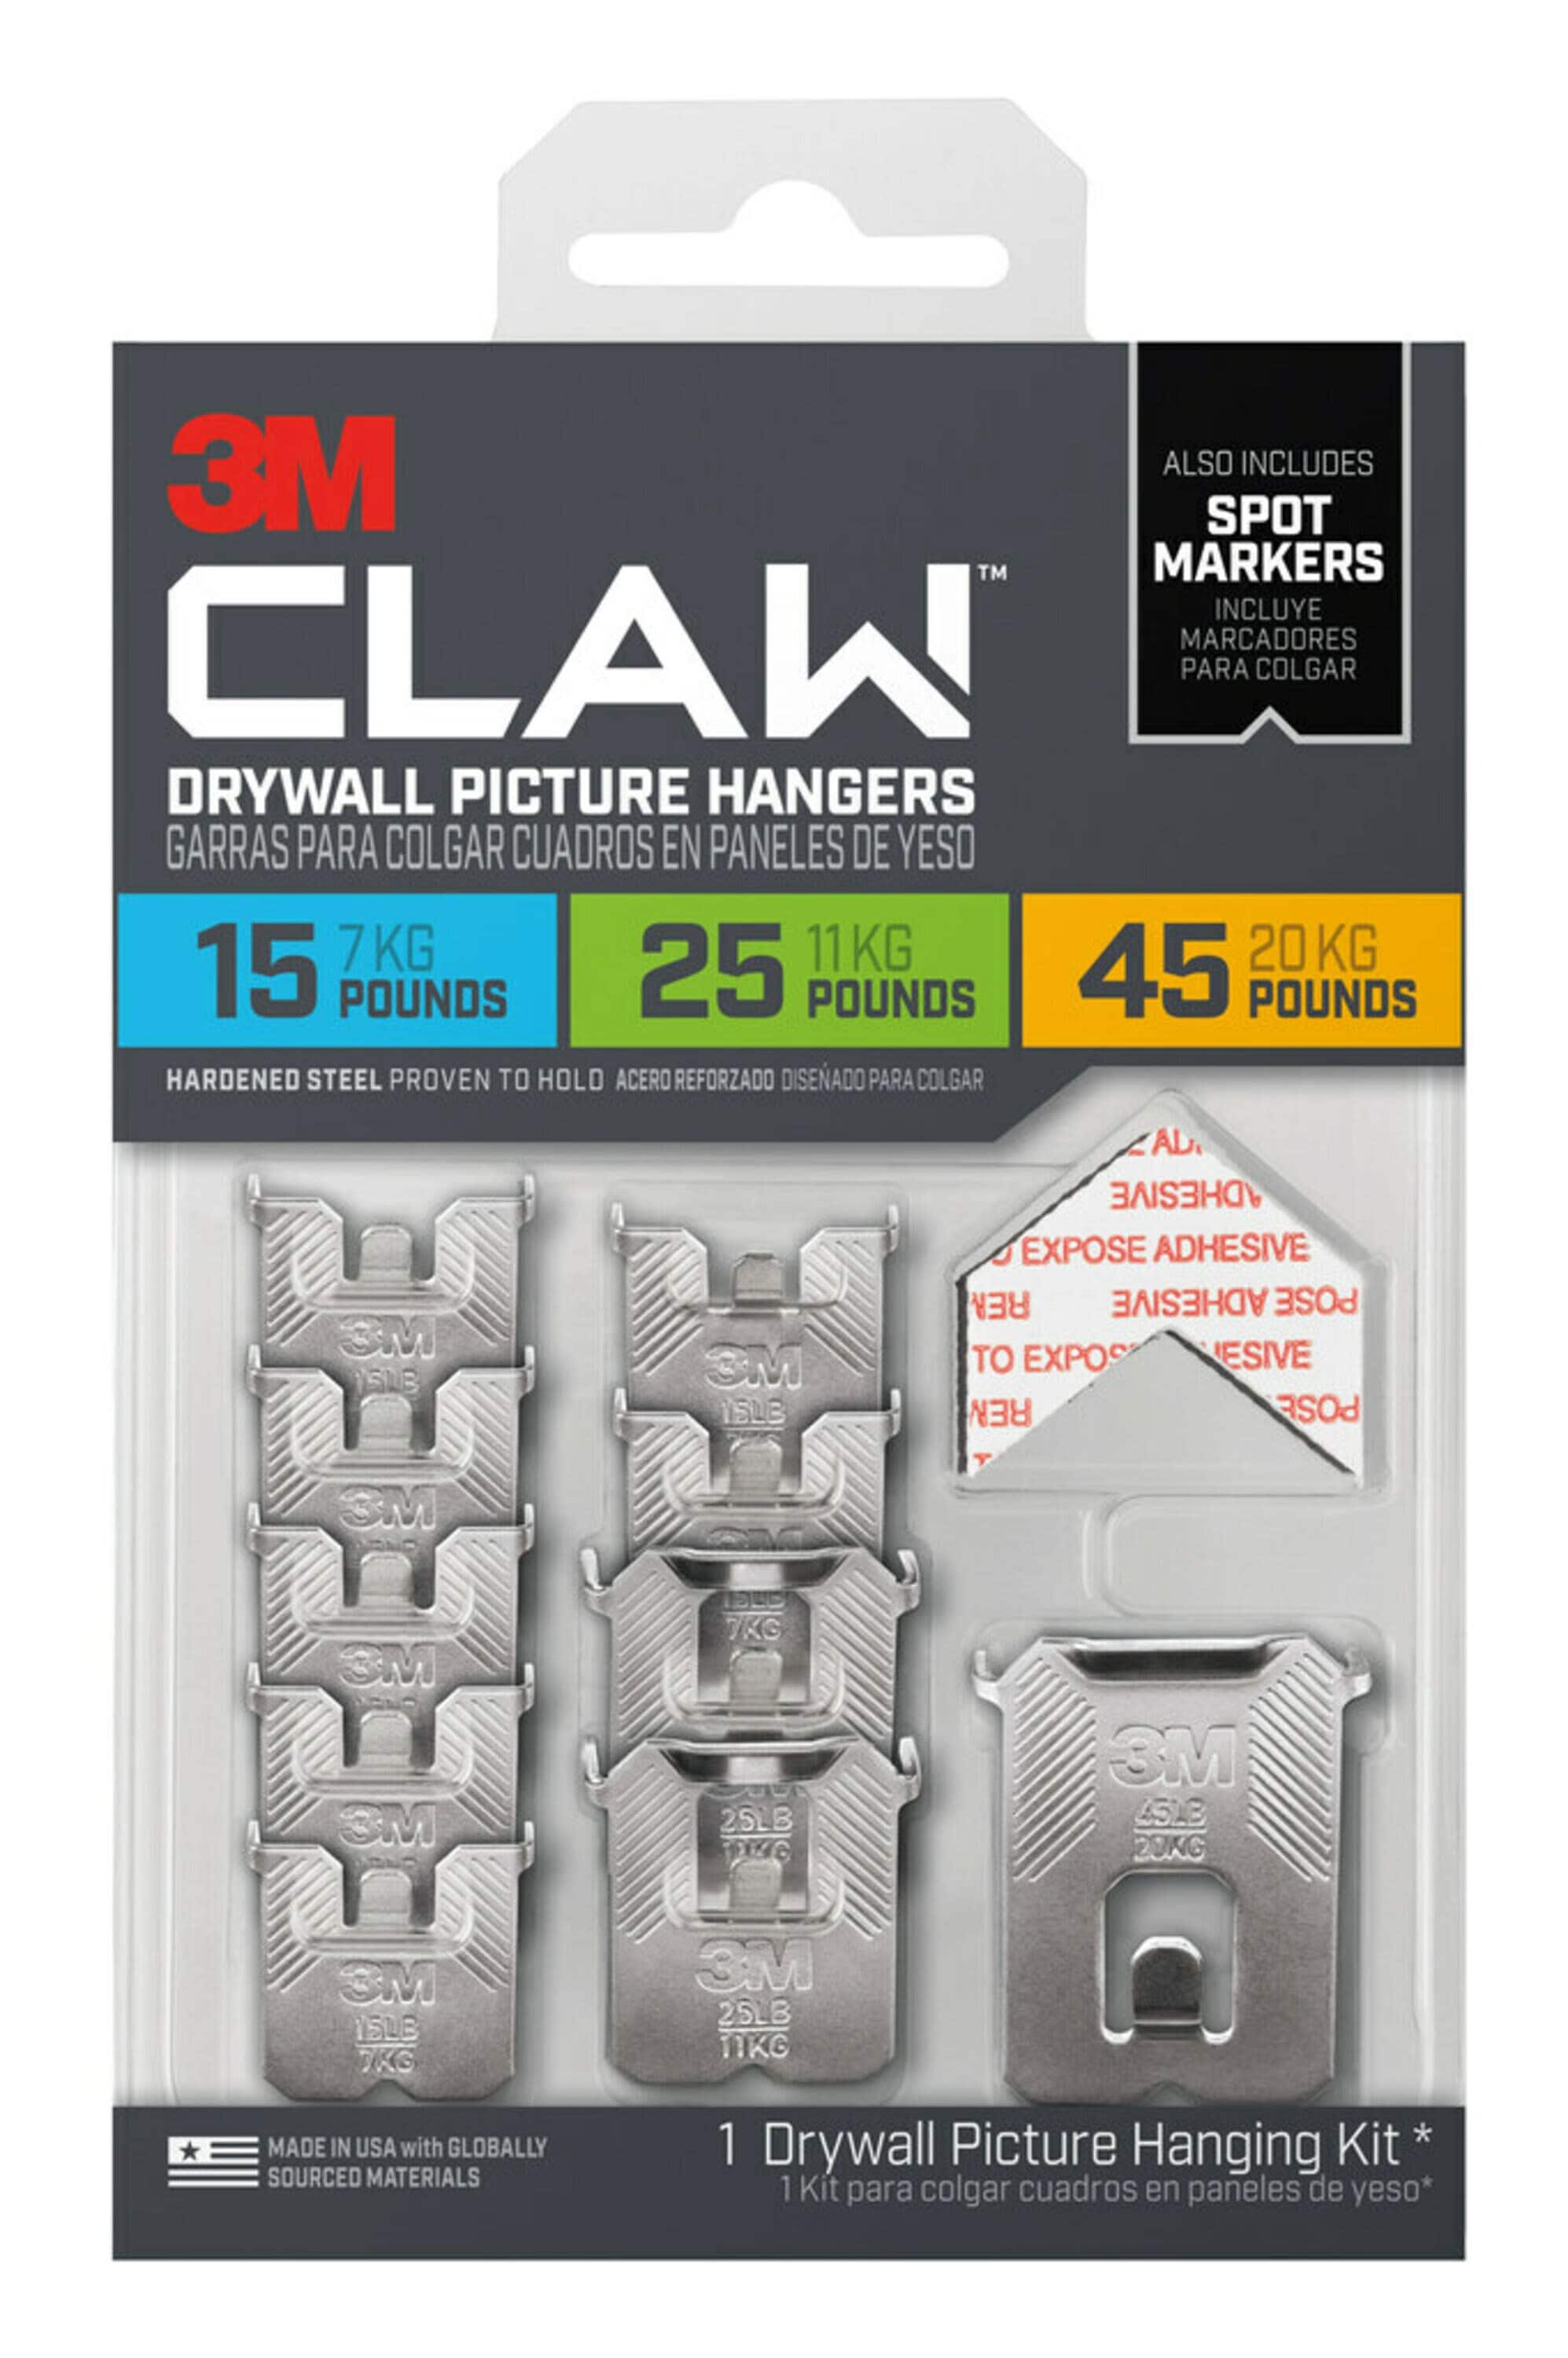 3M Claw Drywall Picture Hanger, 45 lb, 3-Pack